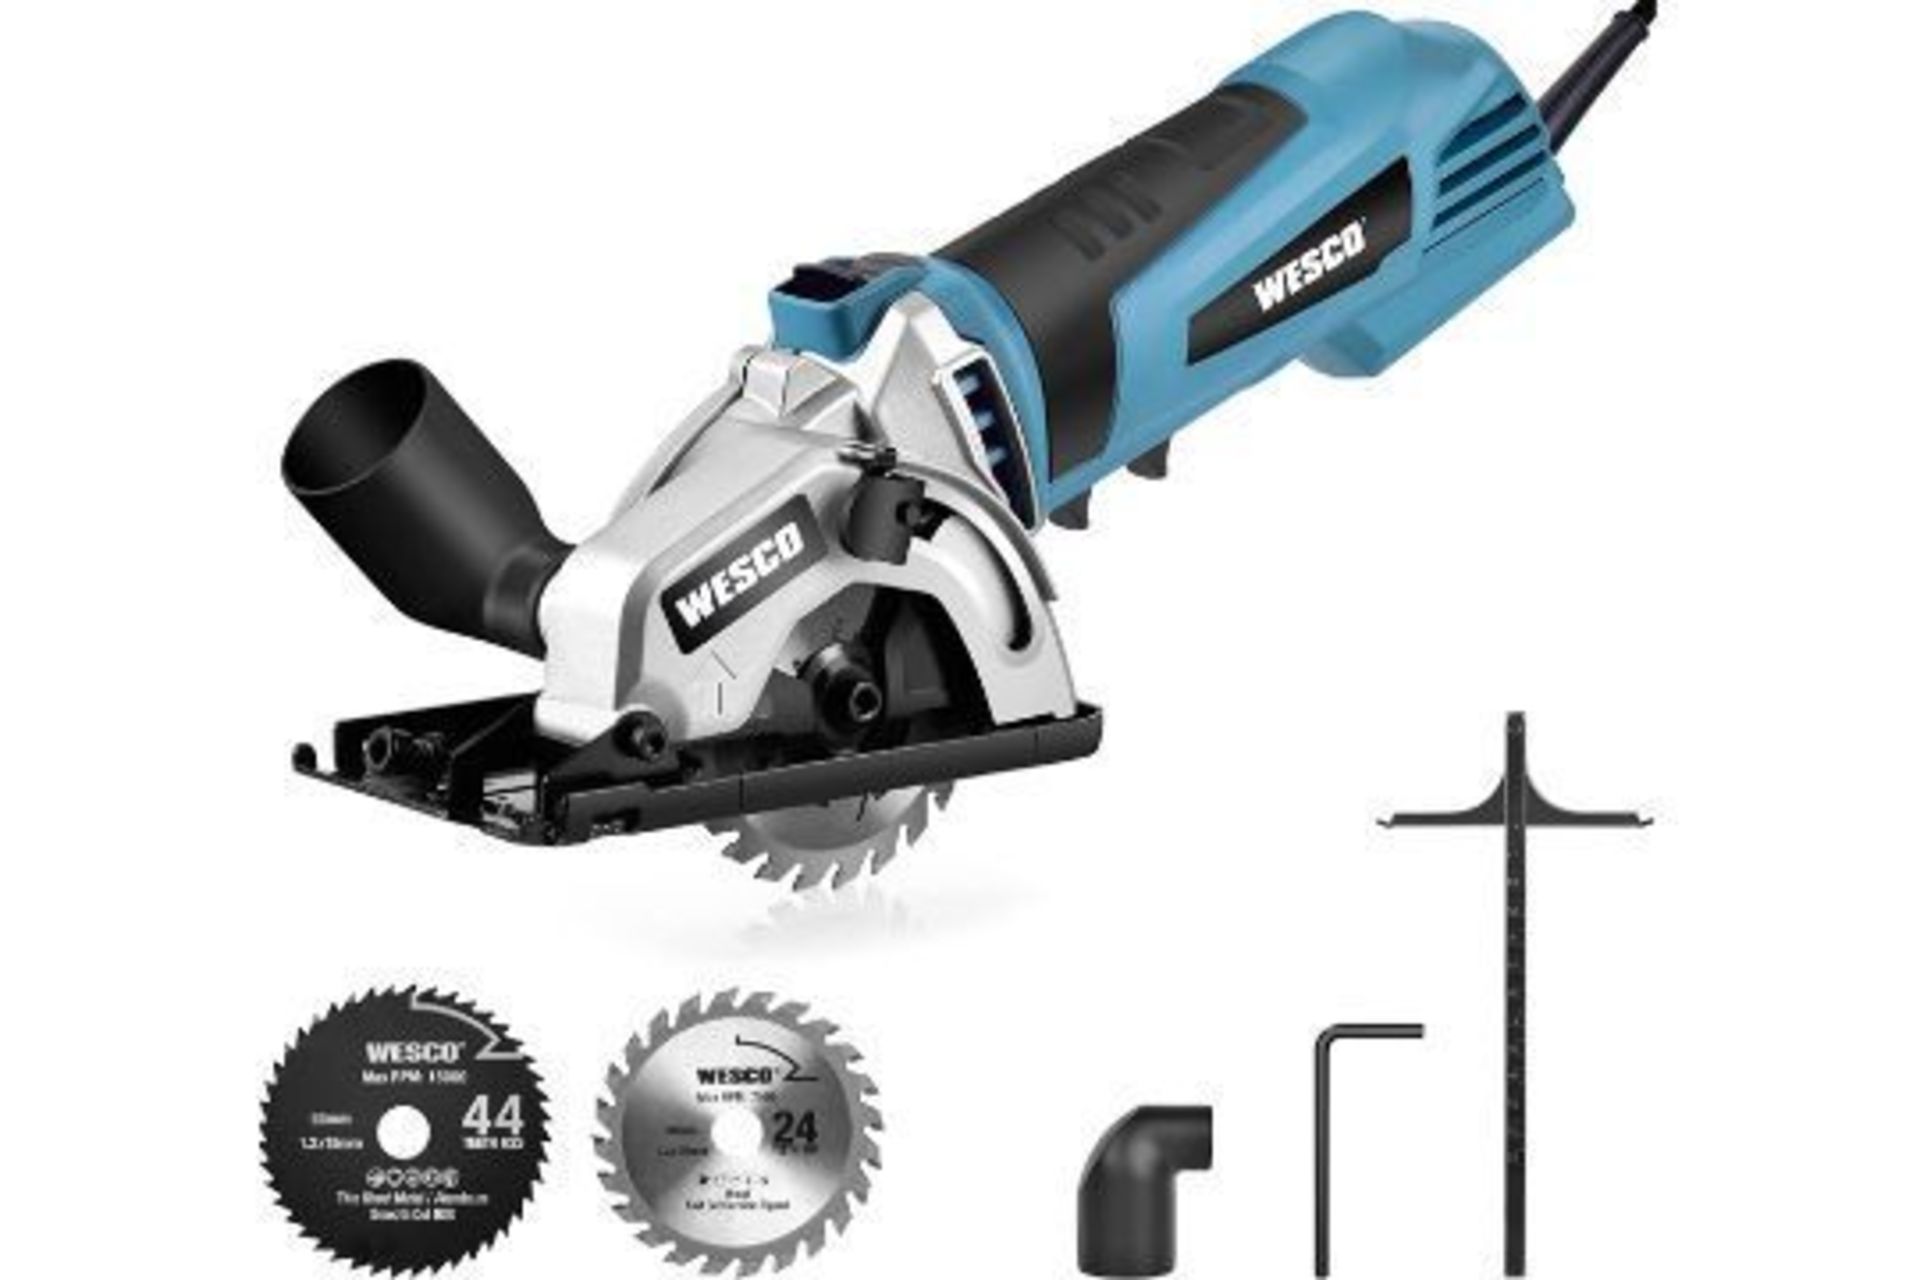 2 x NEW BOXED WESCO 500W 5100 RPM Compact Circular Saw with 2 Saw Blades Cutting Depth 27mm for